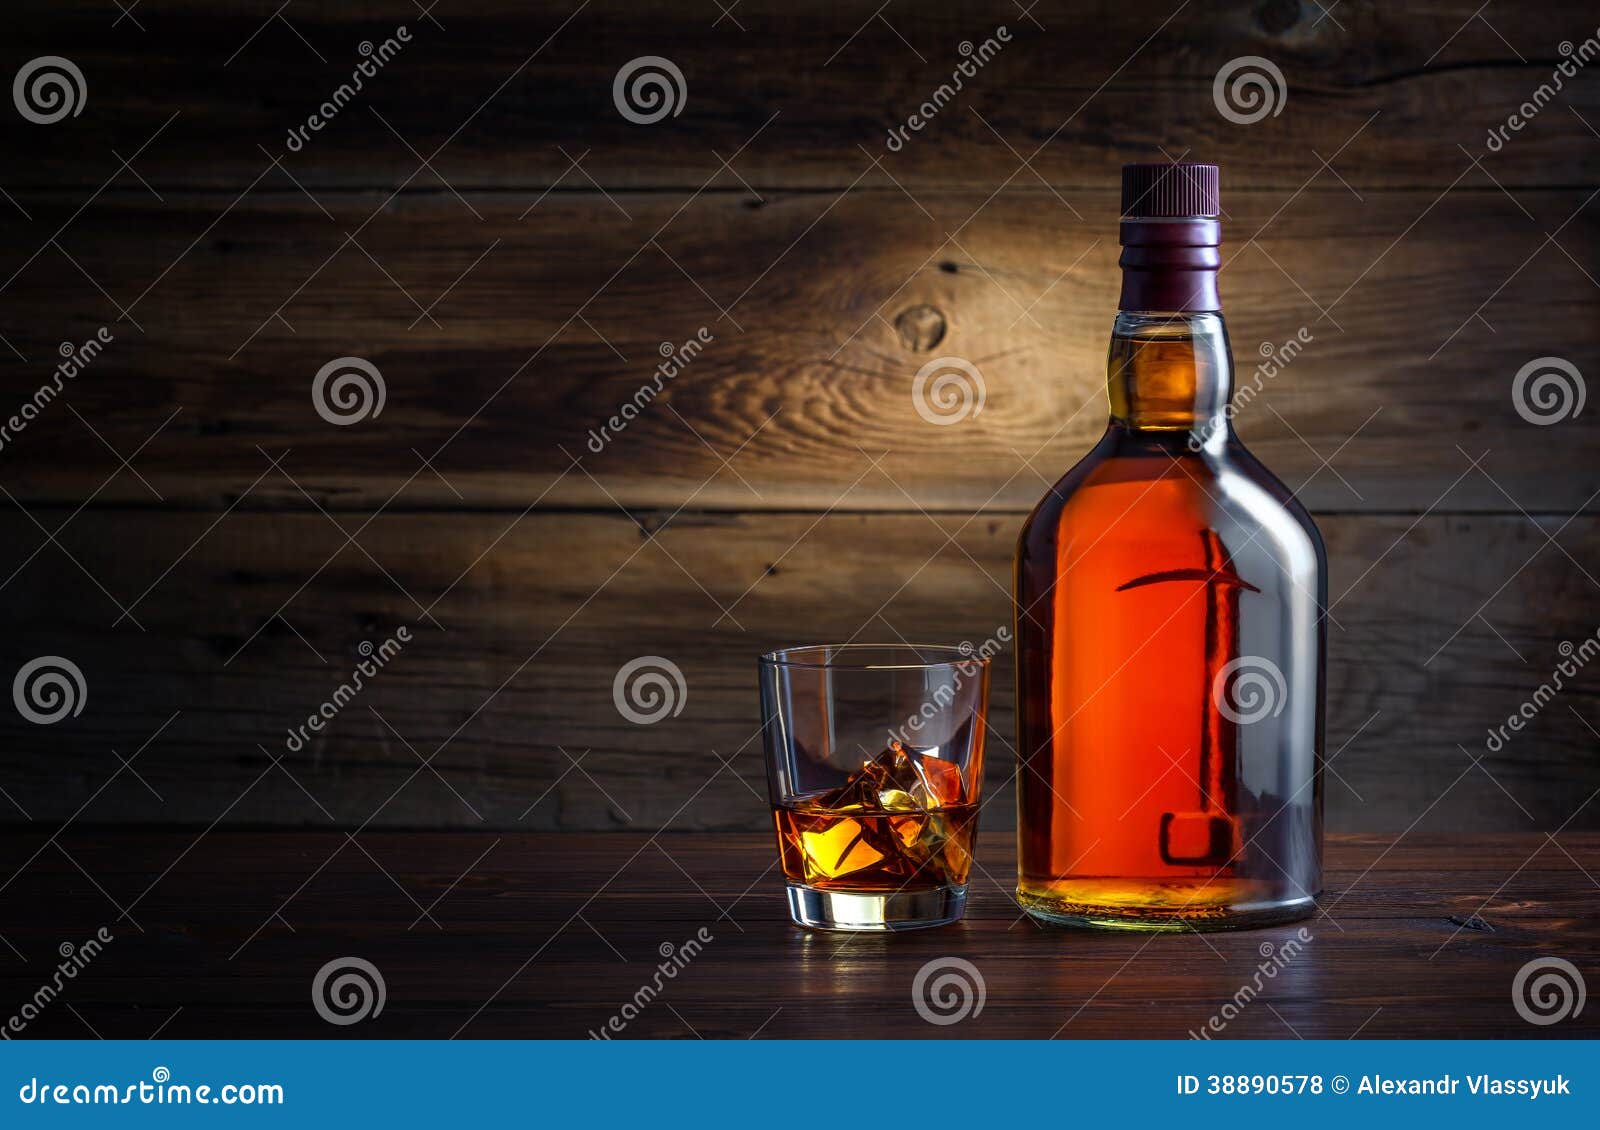 bottle and glass of whiskey